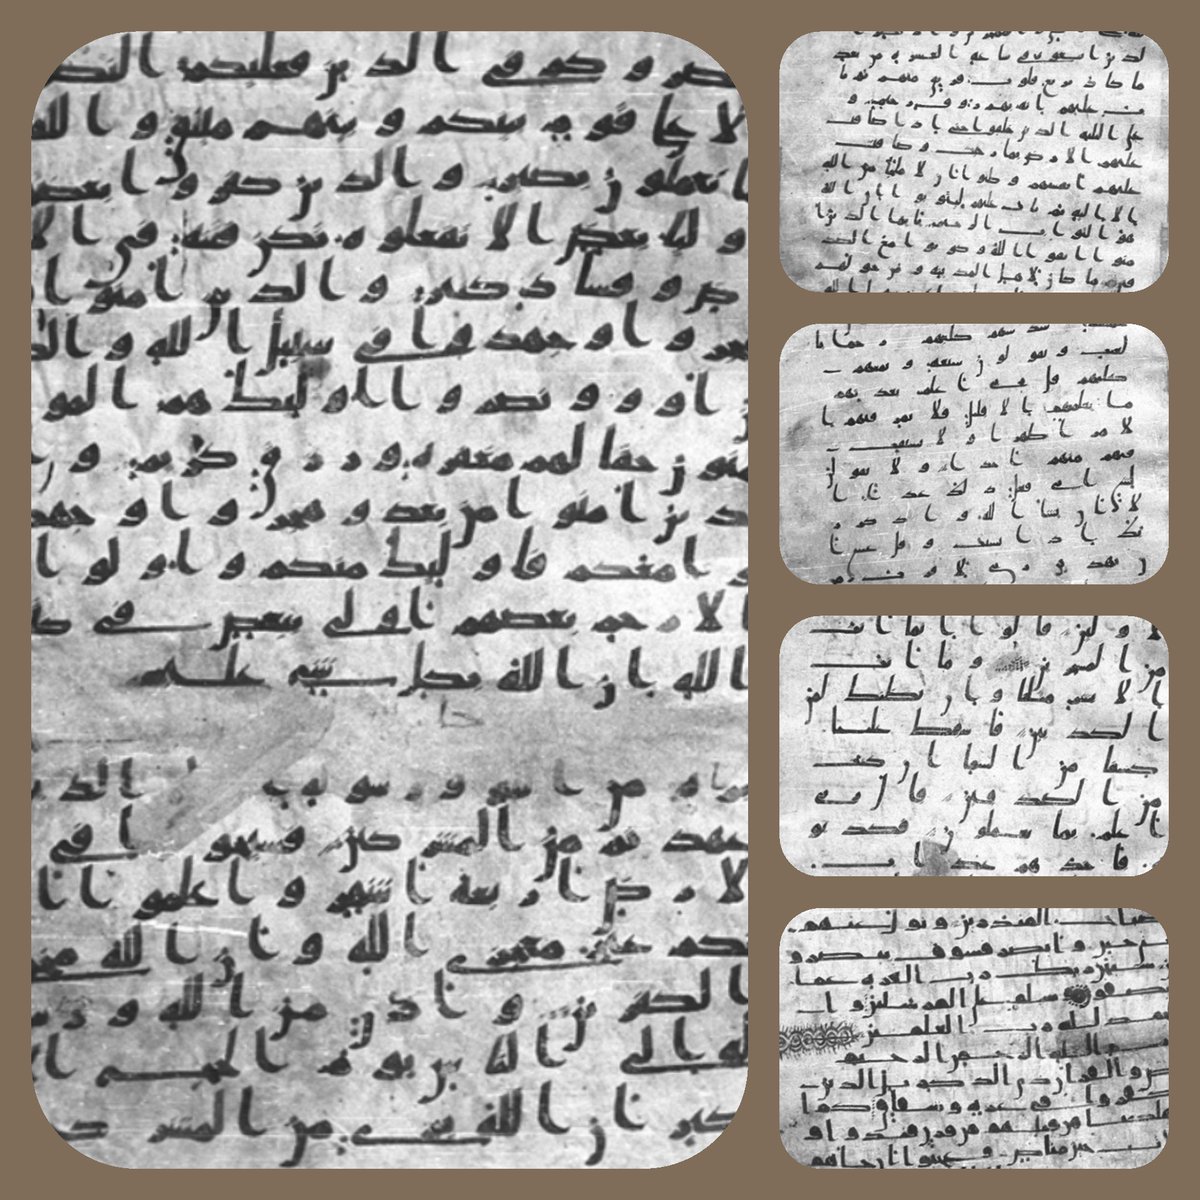 Codex Medina 1a, like many other early Qur'an manuscripts, is the product of collaboration between several scribes who teamed to transcribe the entire Quranic text. We can distinguish 5-6 different hands in the MS as you can see in this collage.